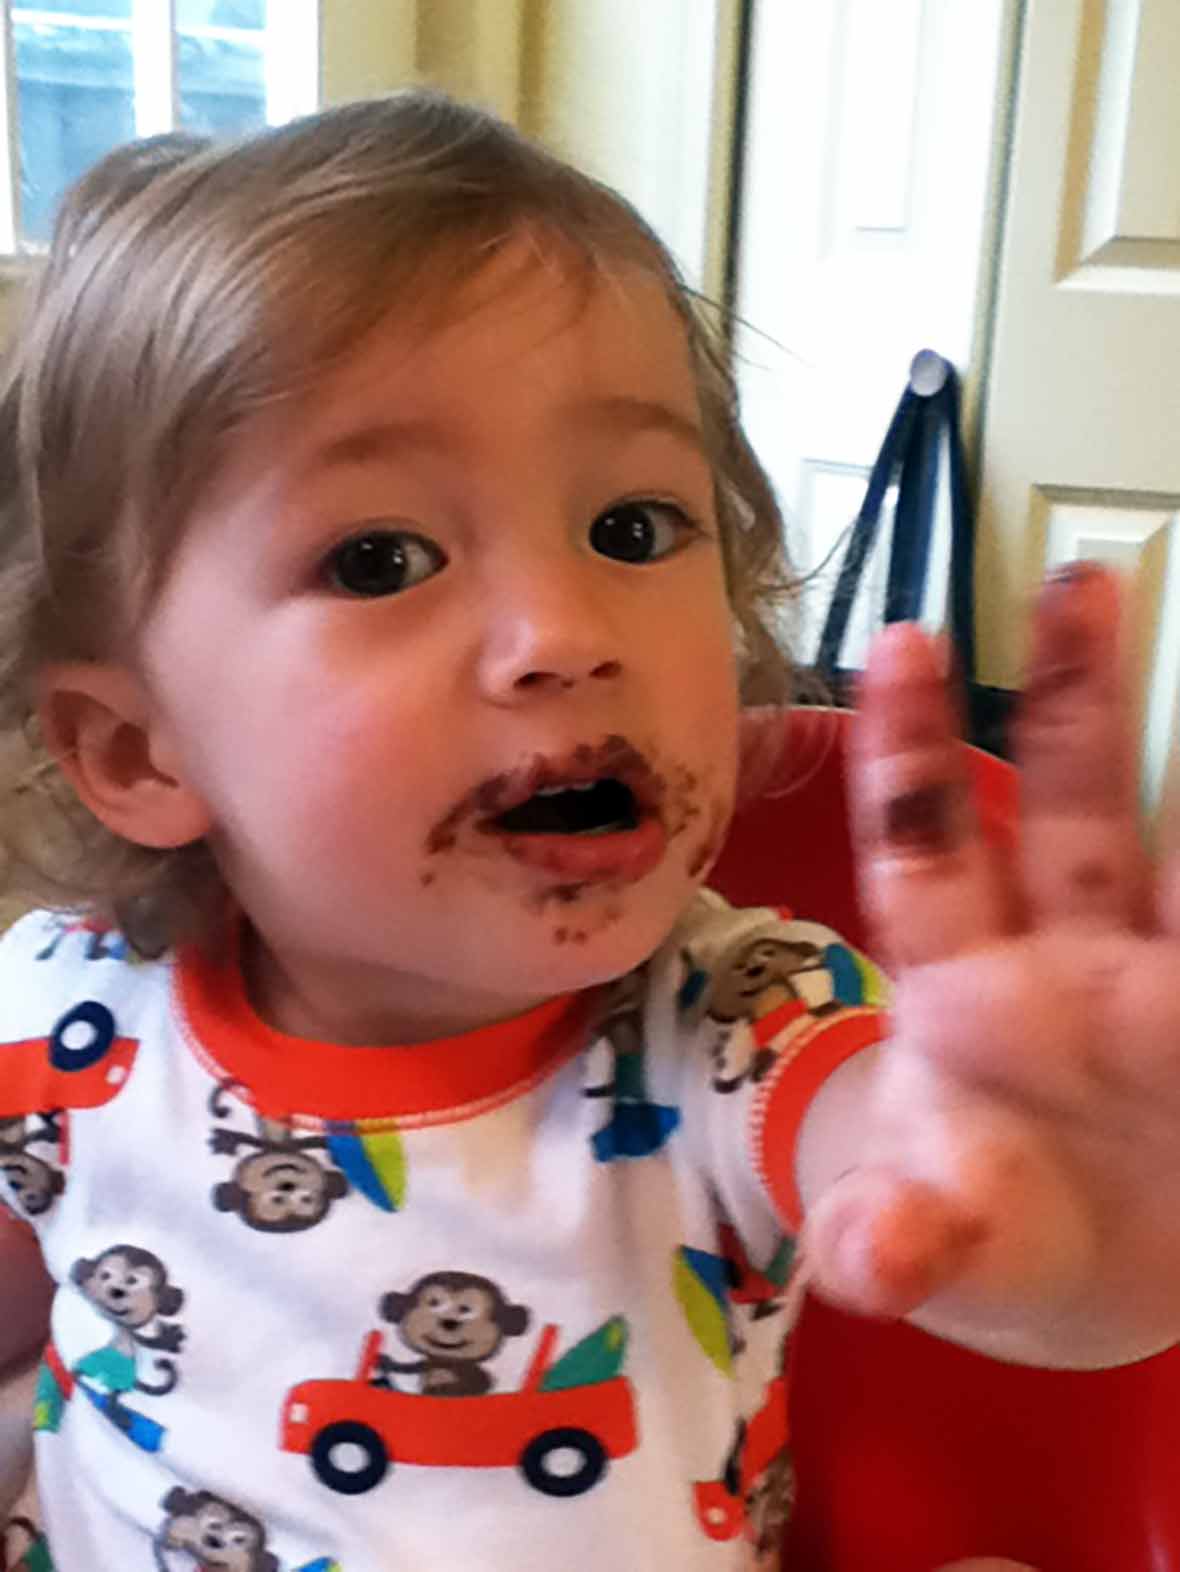 An toddler proudly showing his face smeared with Nutella